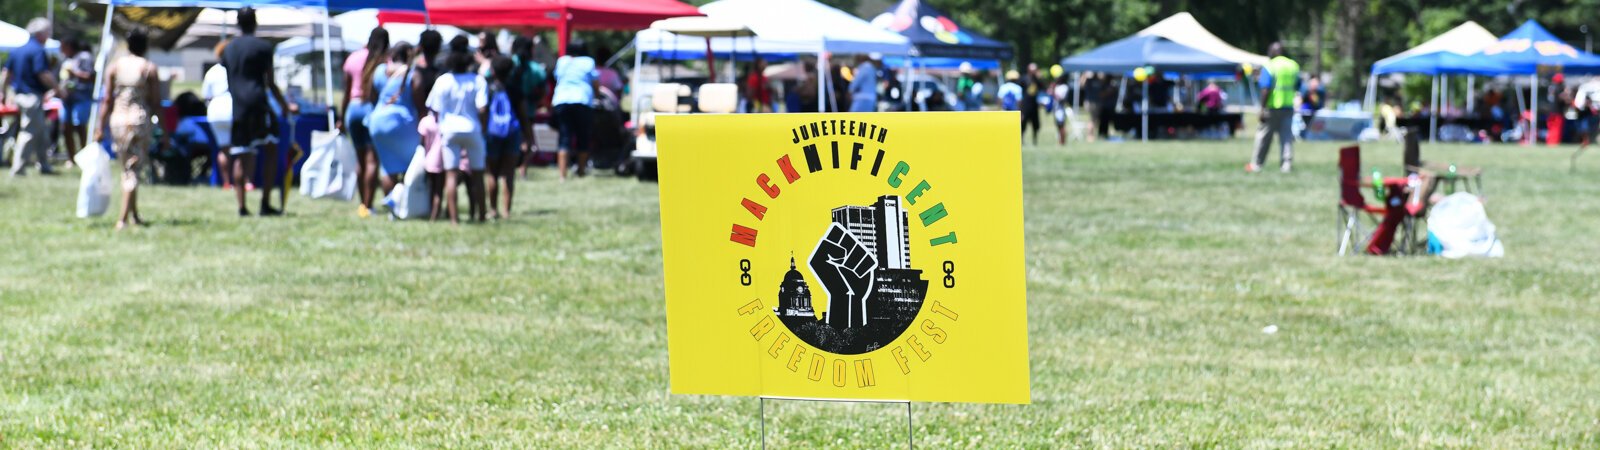  Celebrations are underway during the Juneteenth Macknificent Freedom Fest at McMillen Park on June 18, 2022.